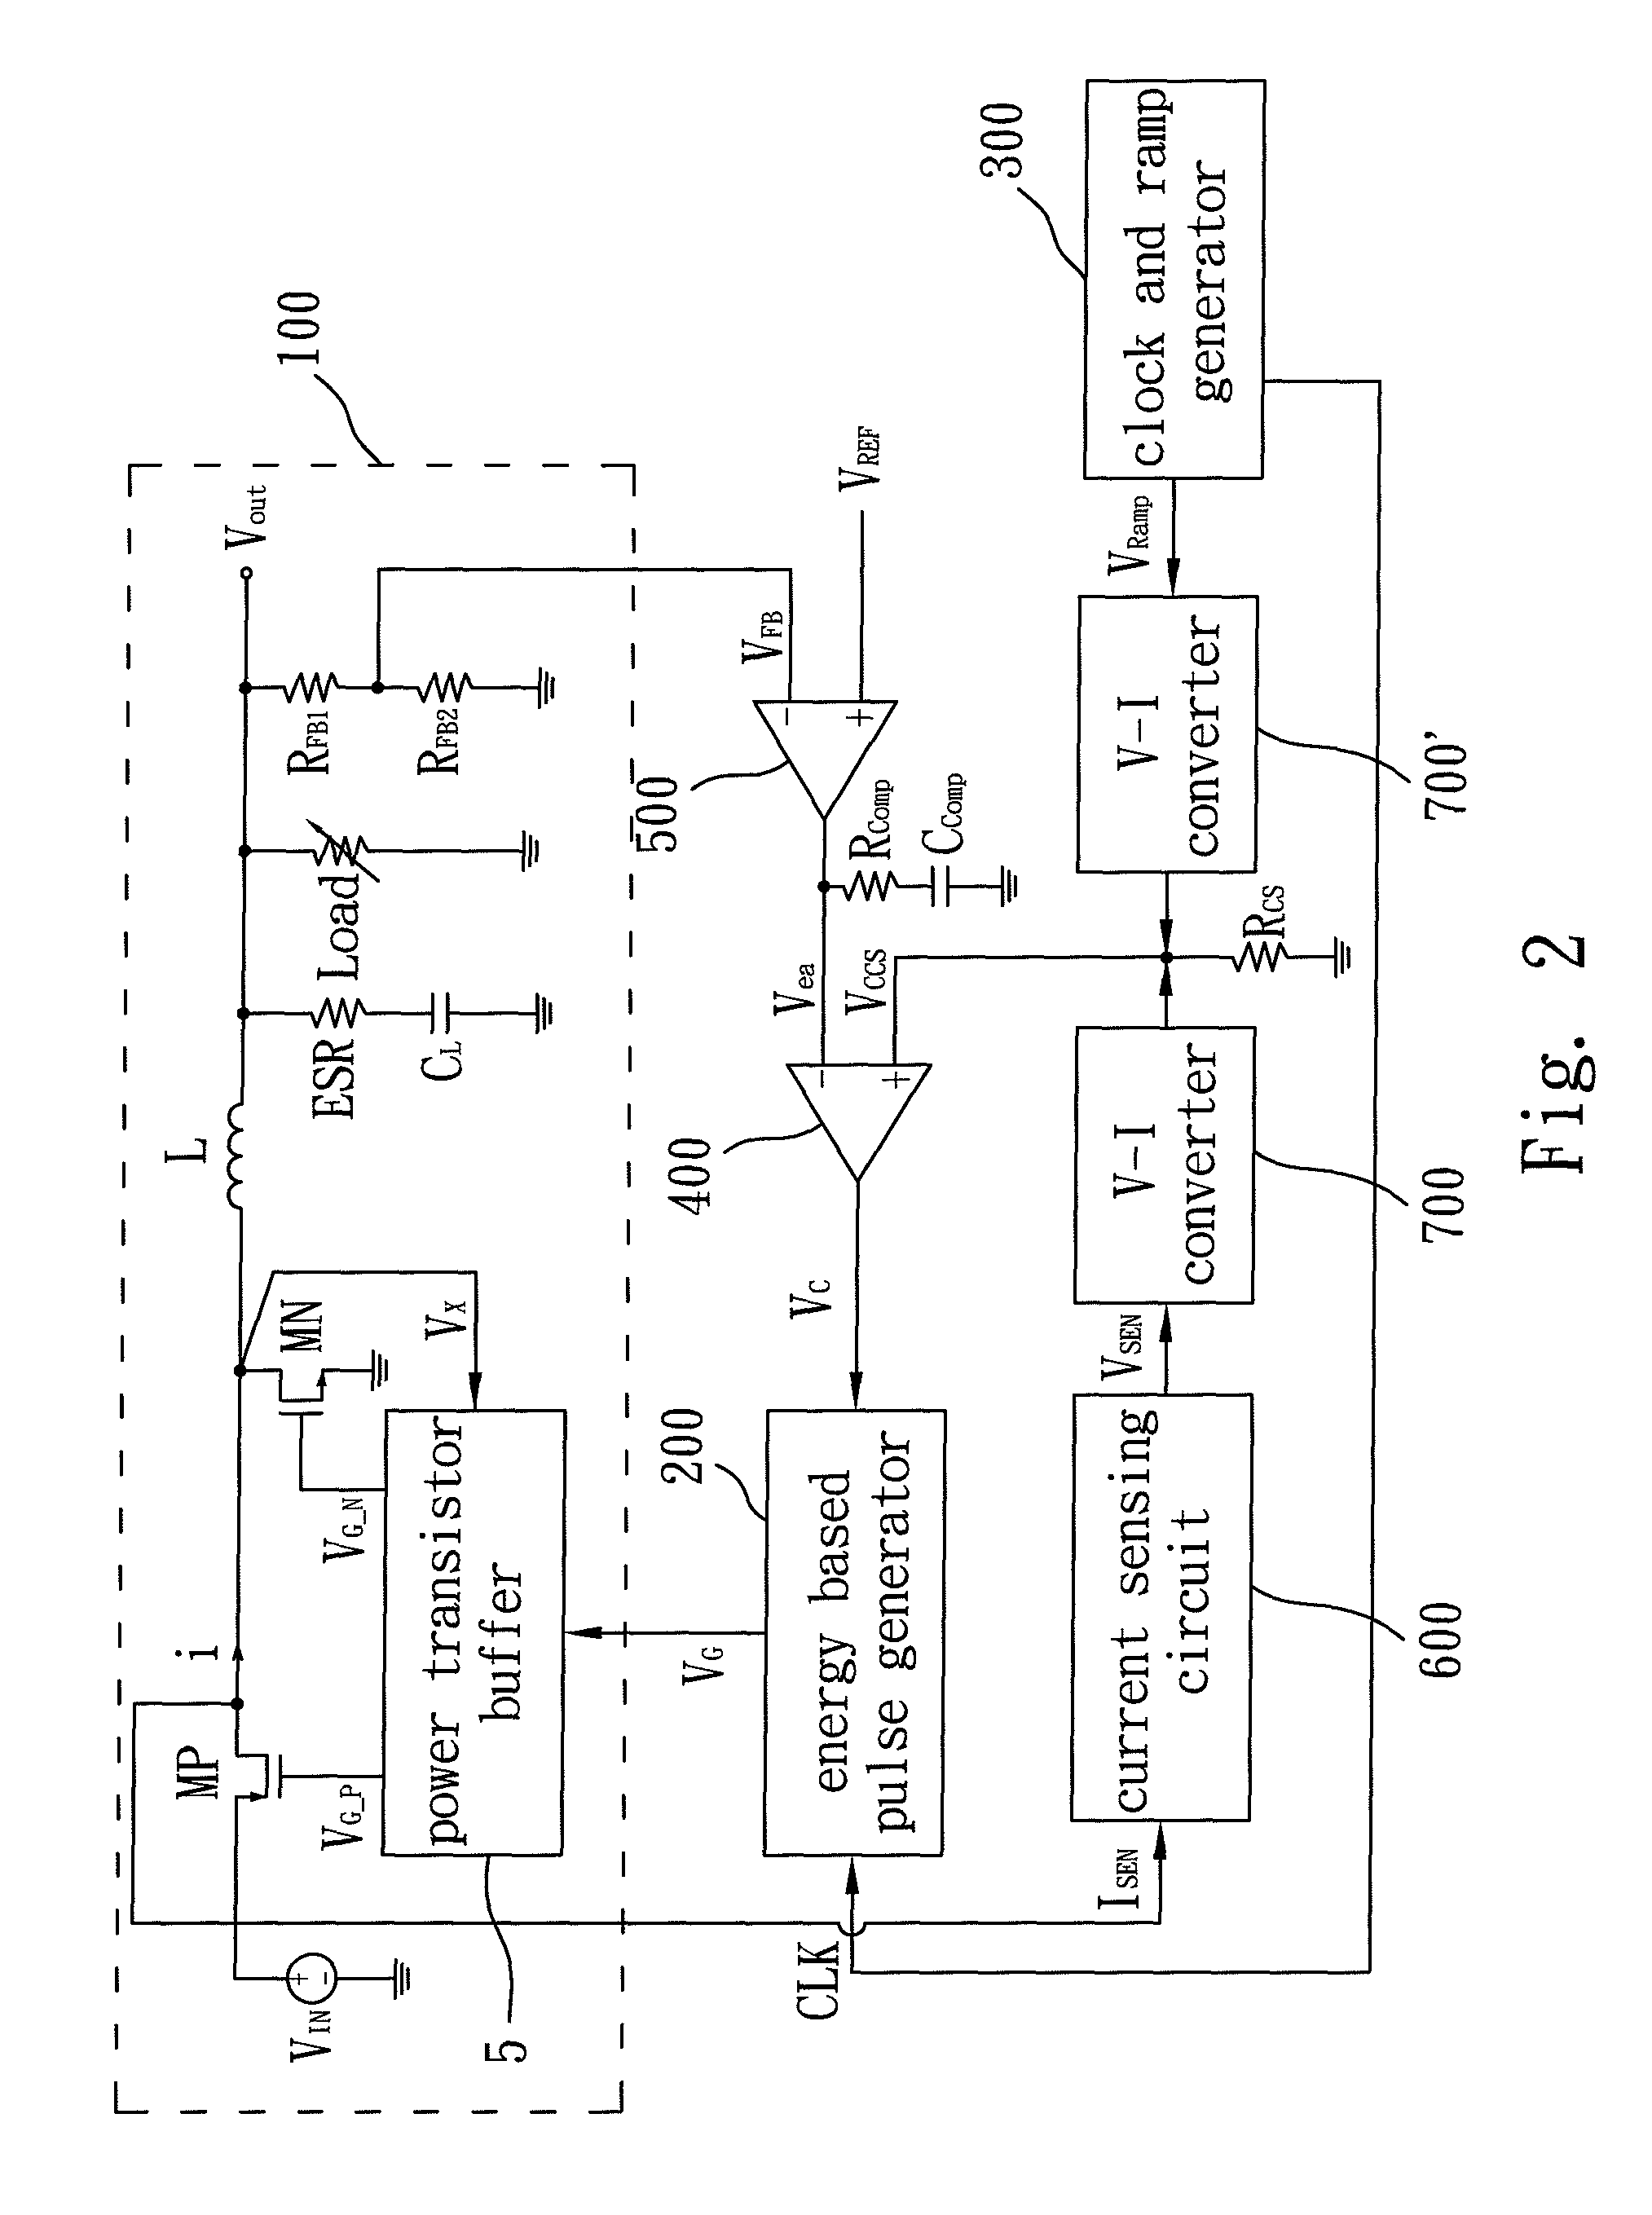 Energy-based oriented switching mode power supply